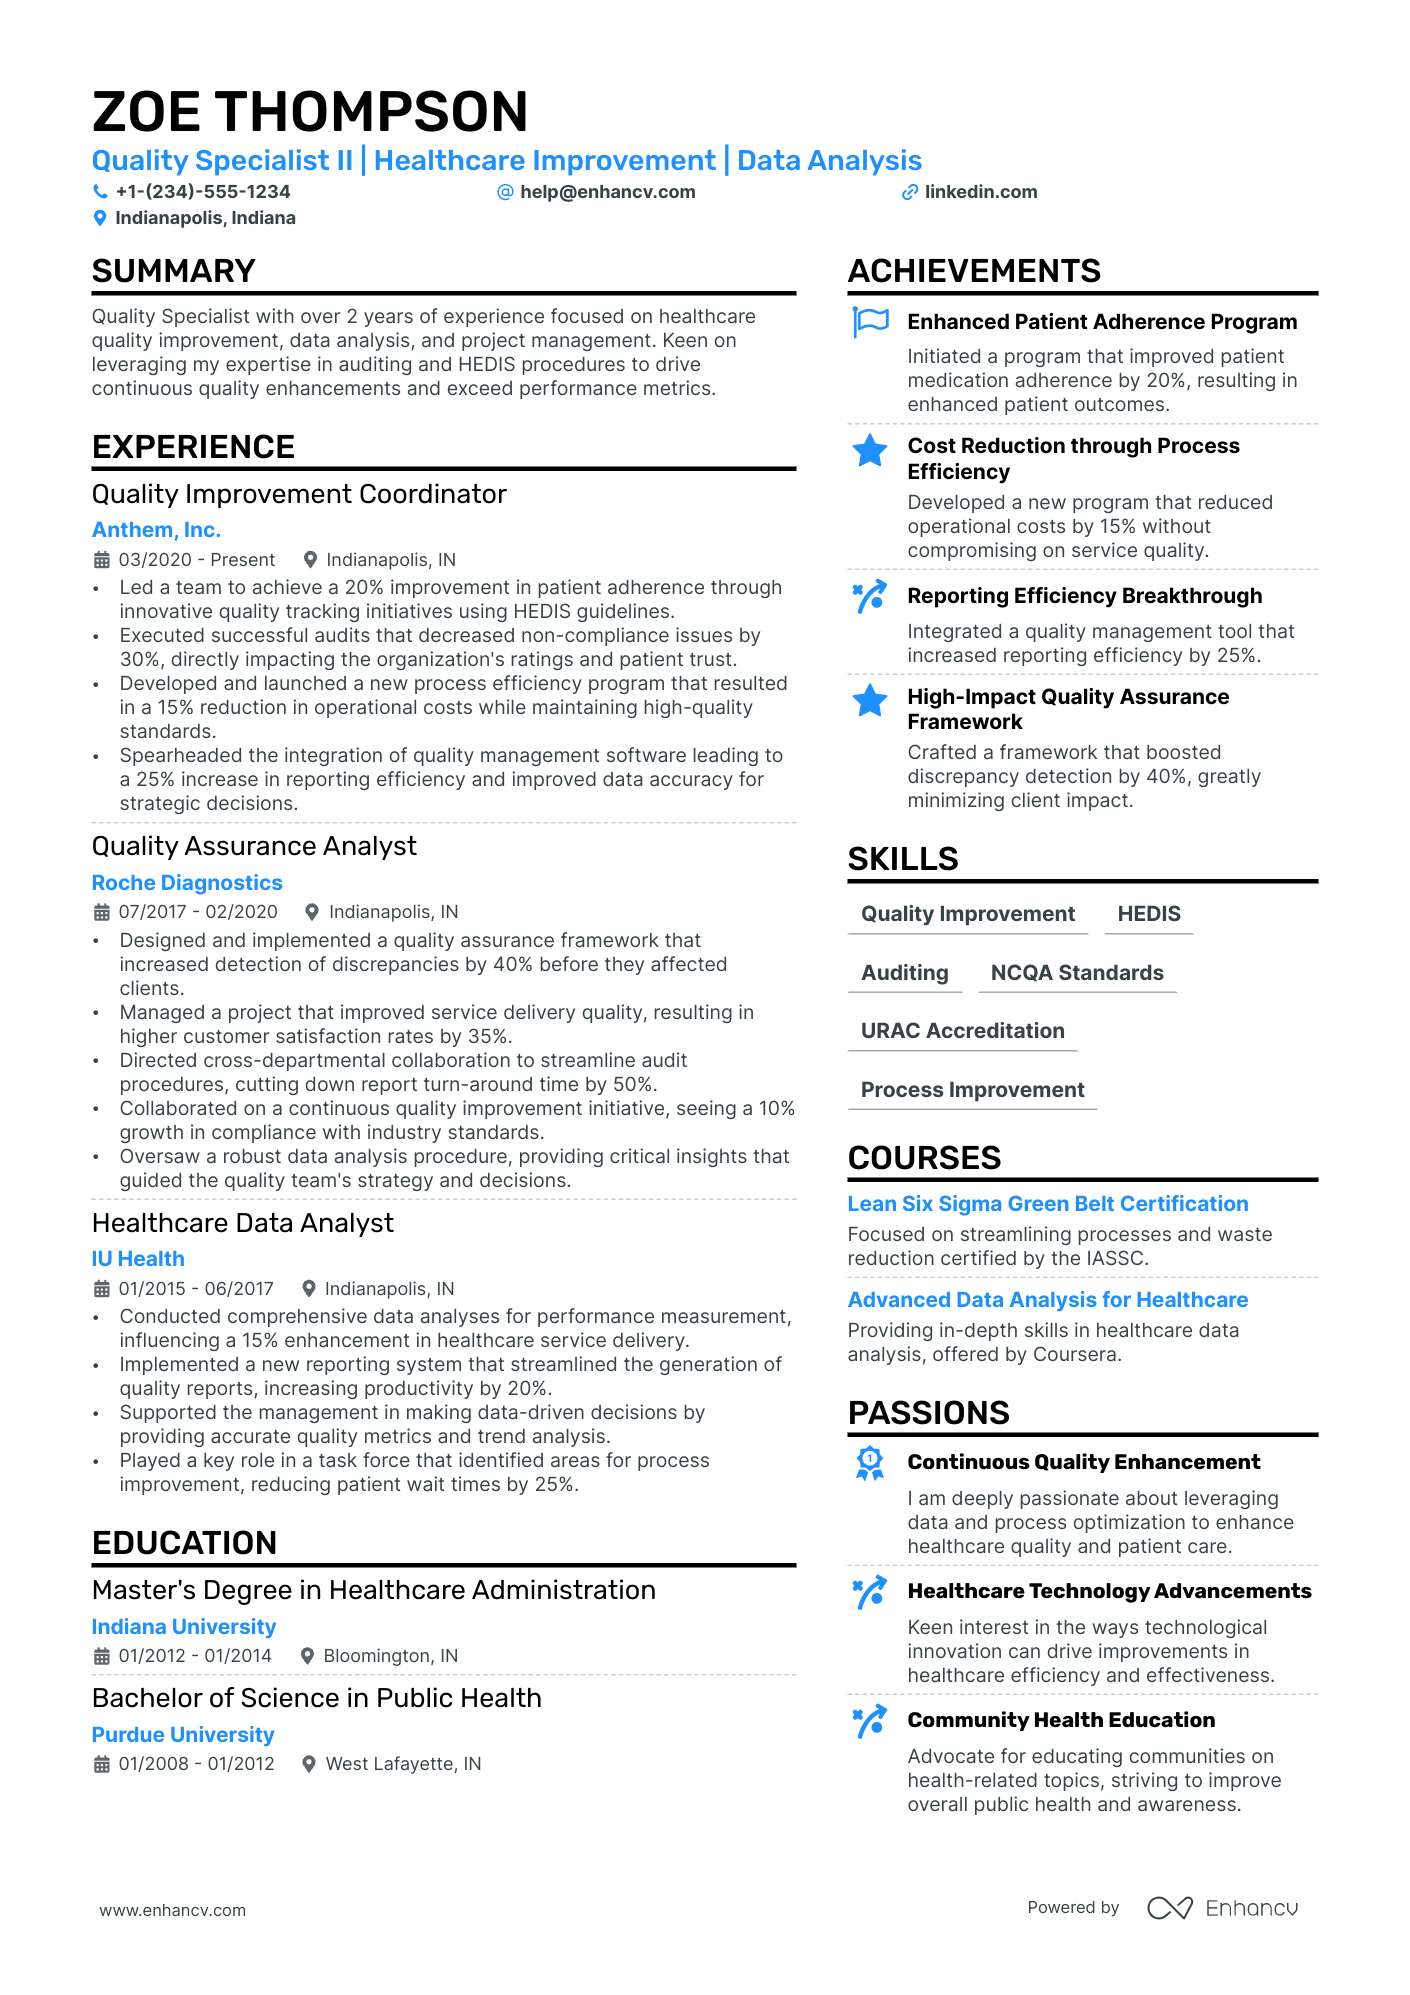 Quality Specialist resume example